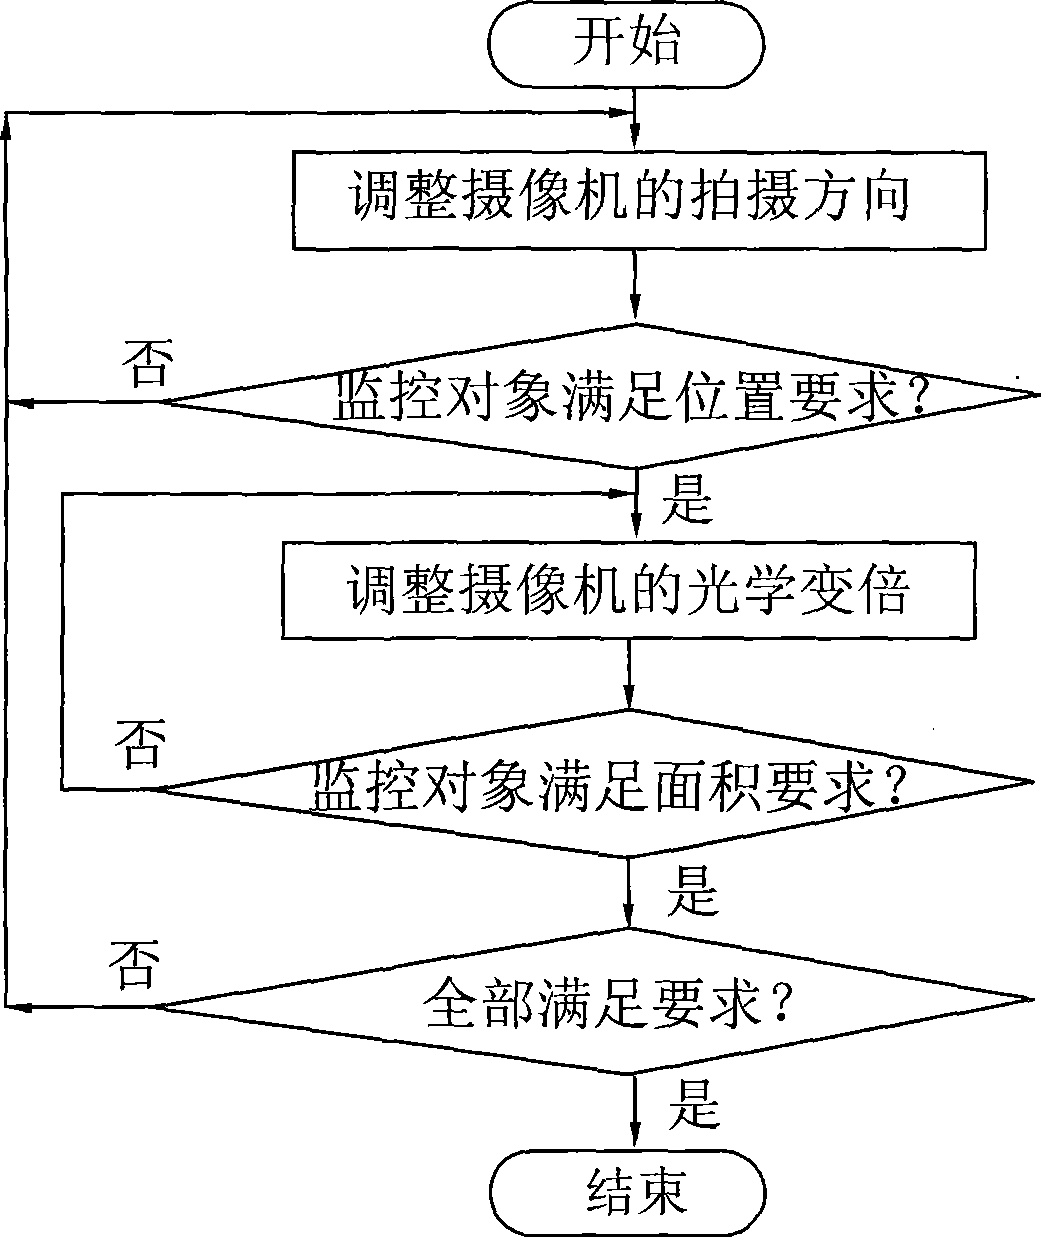 Distance measuring method in camera monitoring system